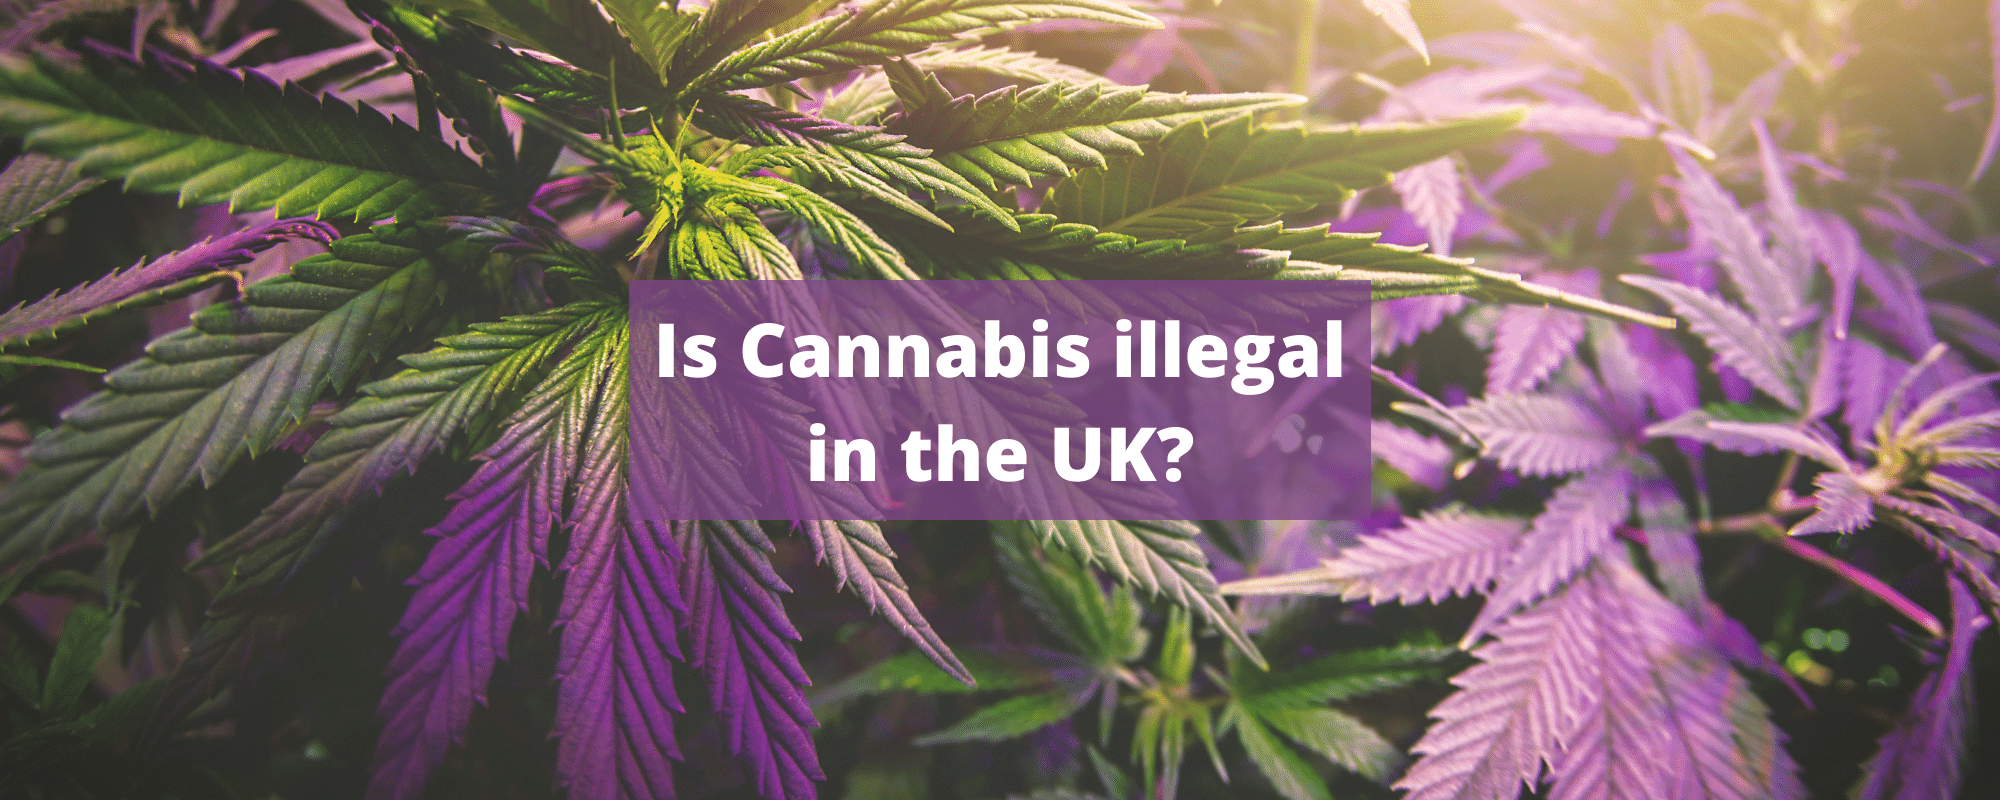 cannabis illegal in the UK